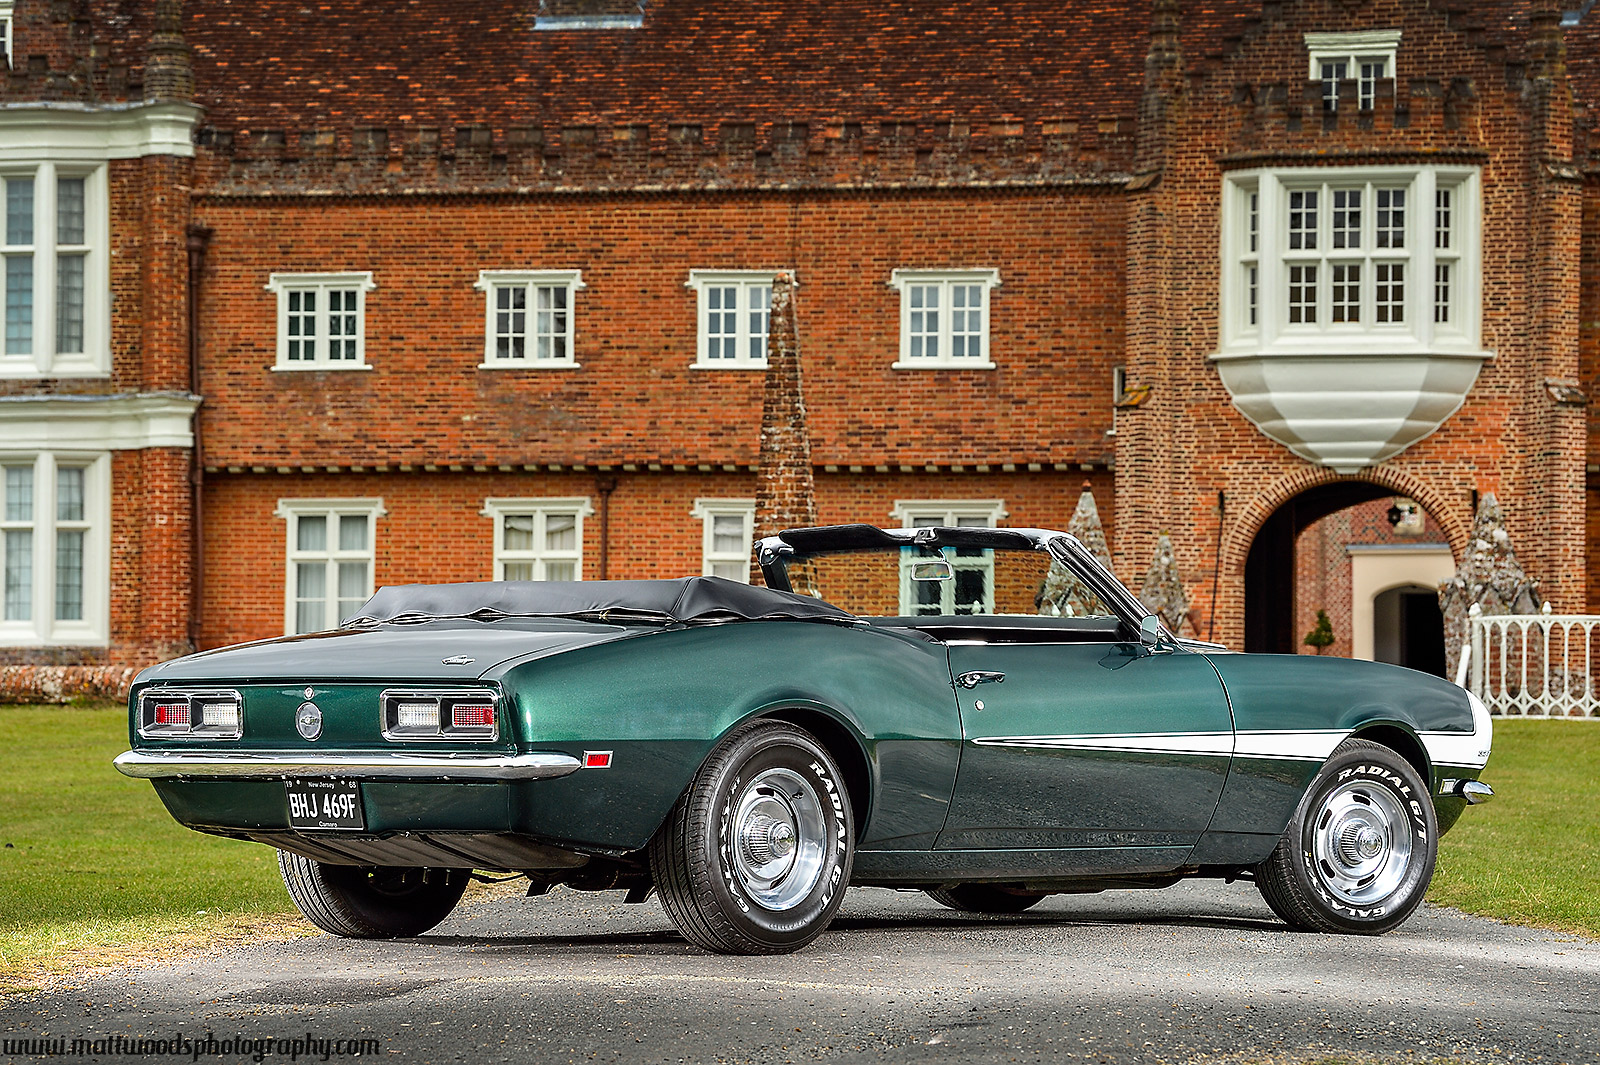 Classic Car Photography and Shoots in Suffolk